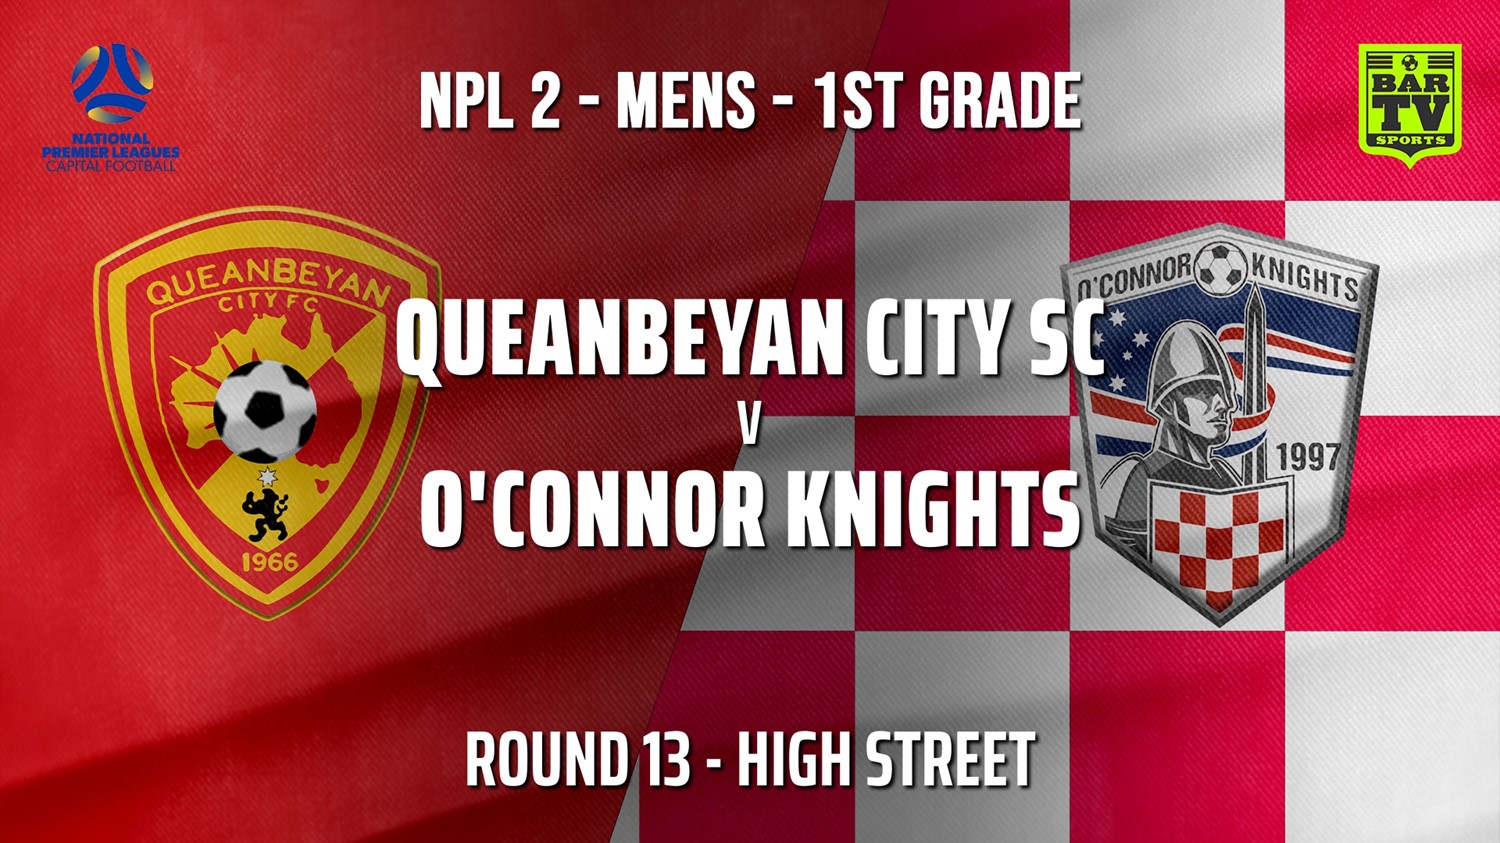 210708-NPL 2 Men - 1st Grade - Capital Round 13 - Queanbeyan City SC v O'Connor Knights Minigame Slate Image